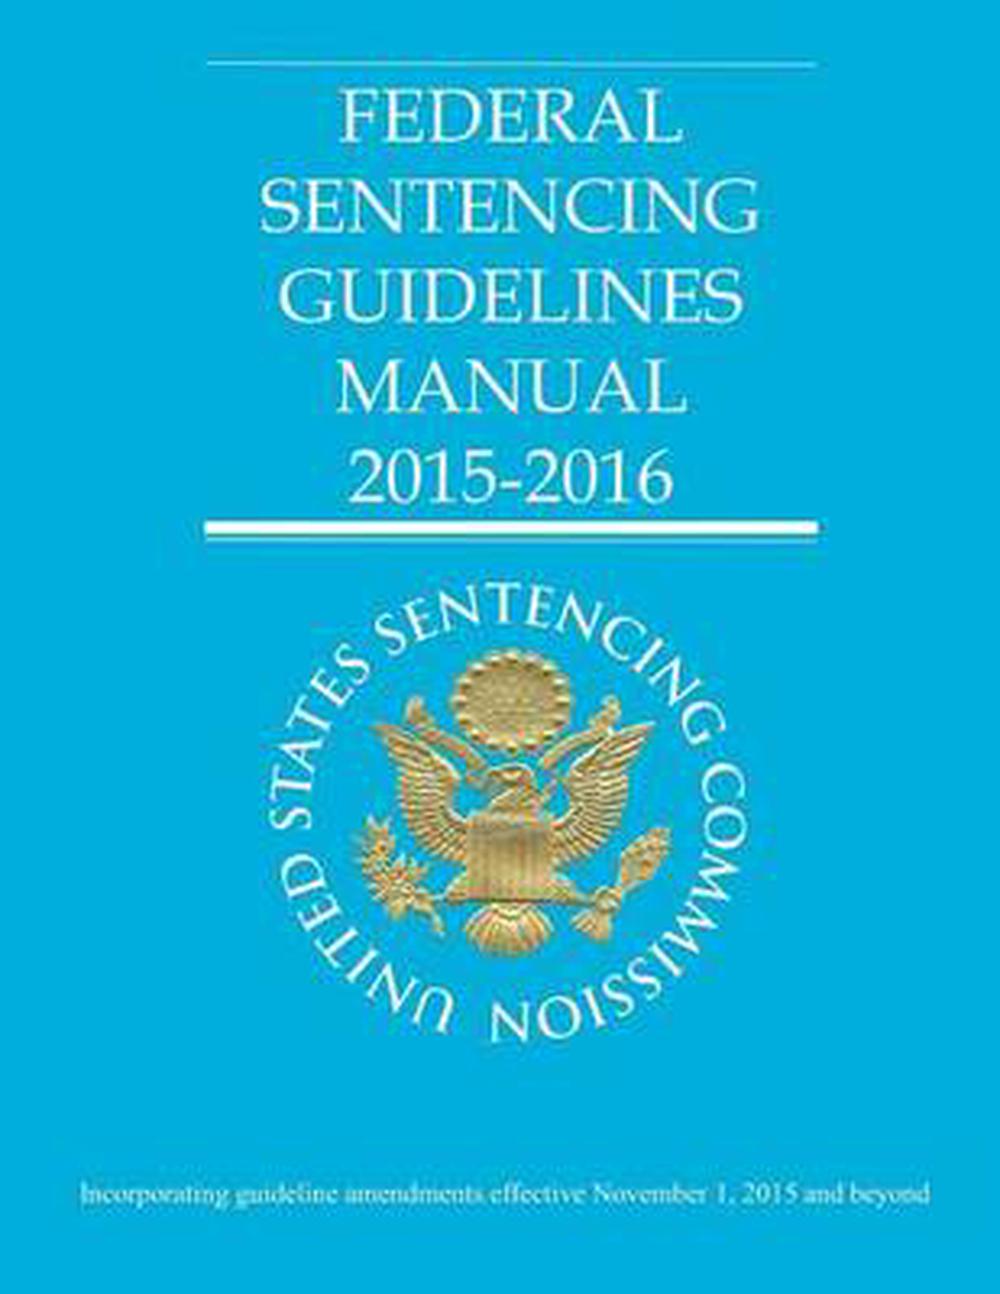 federal-sentencing-guidelines-manual-2015-2016-by-united-states